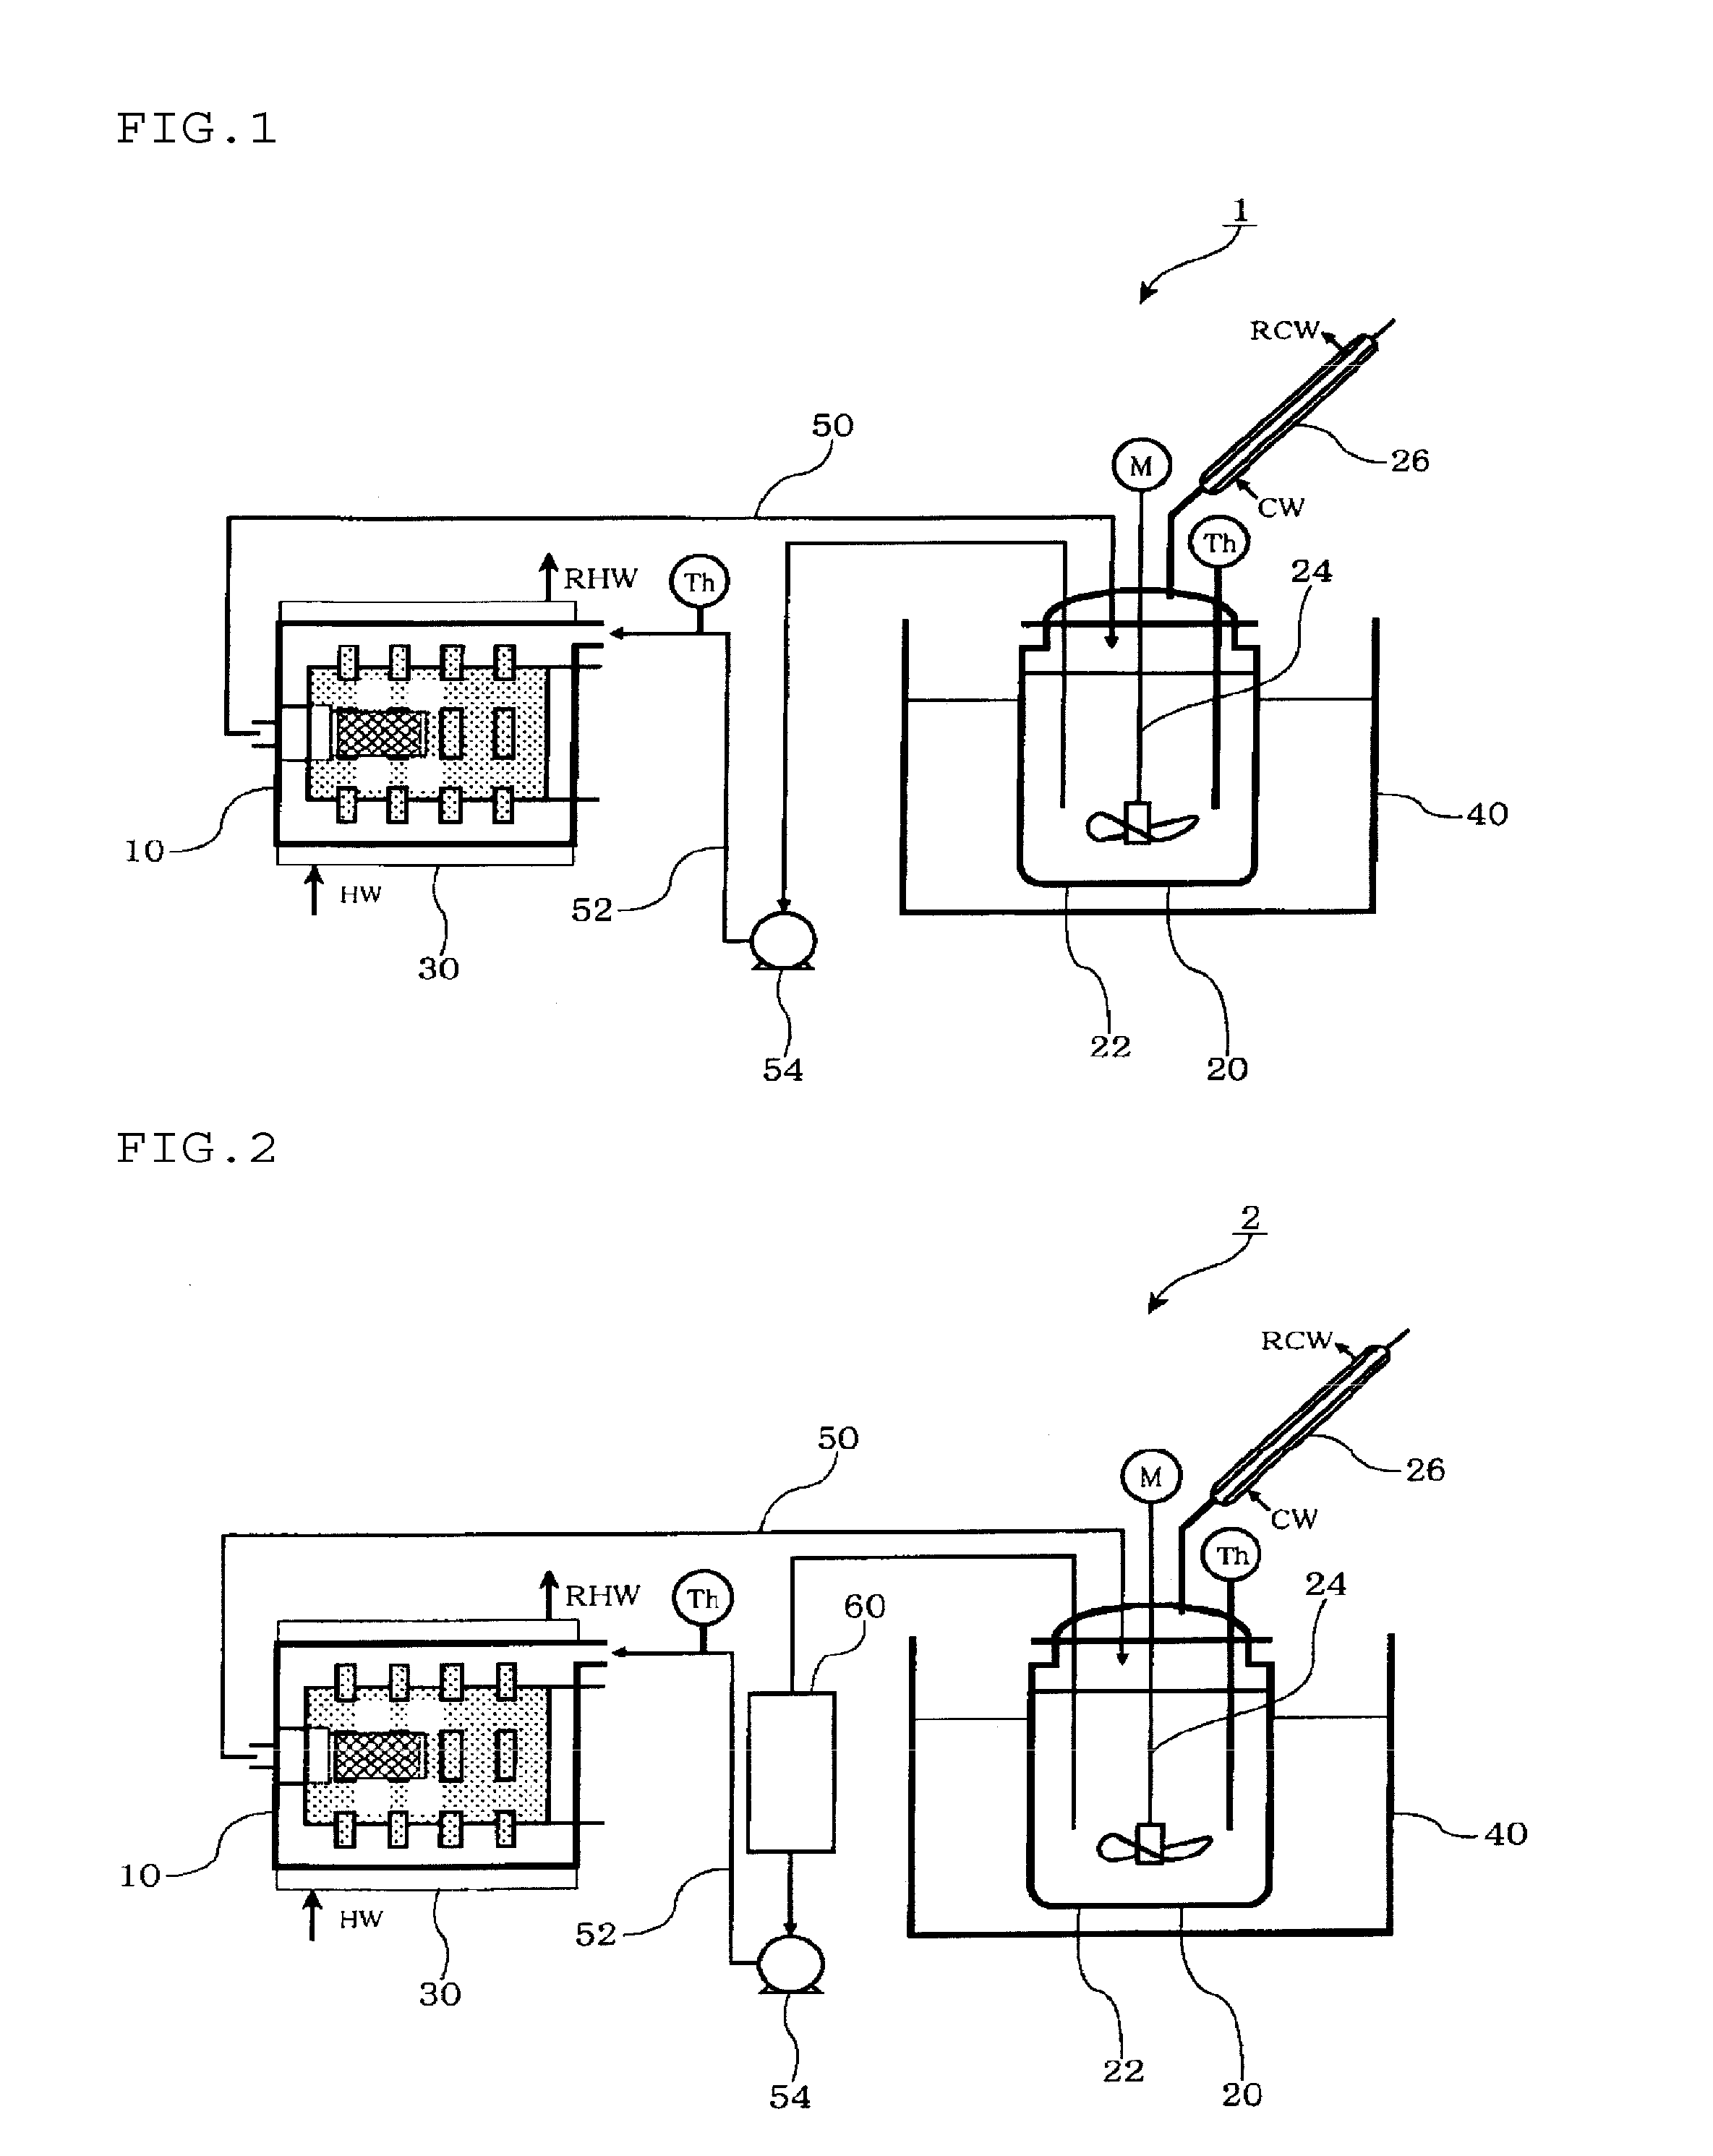 Production method of solid electrolyte